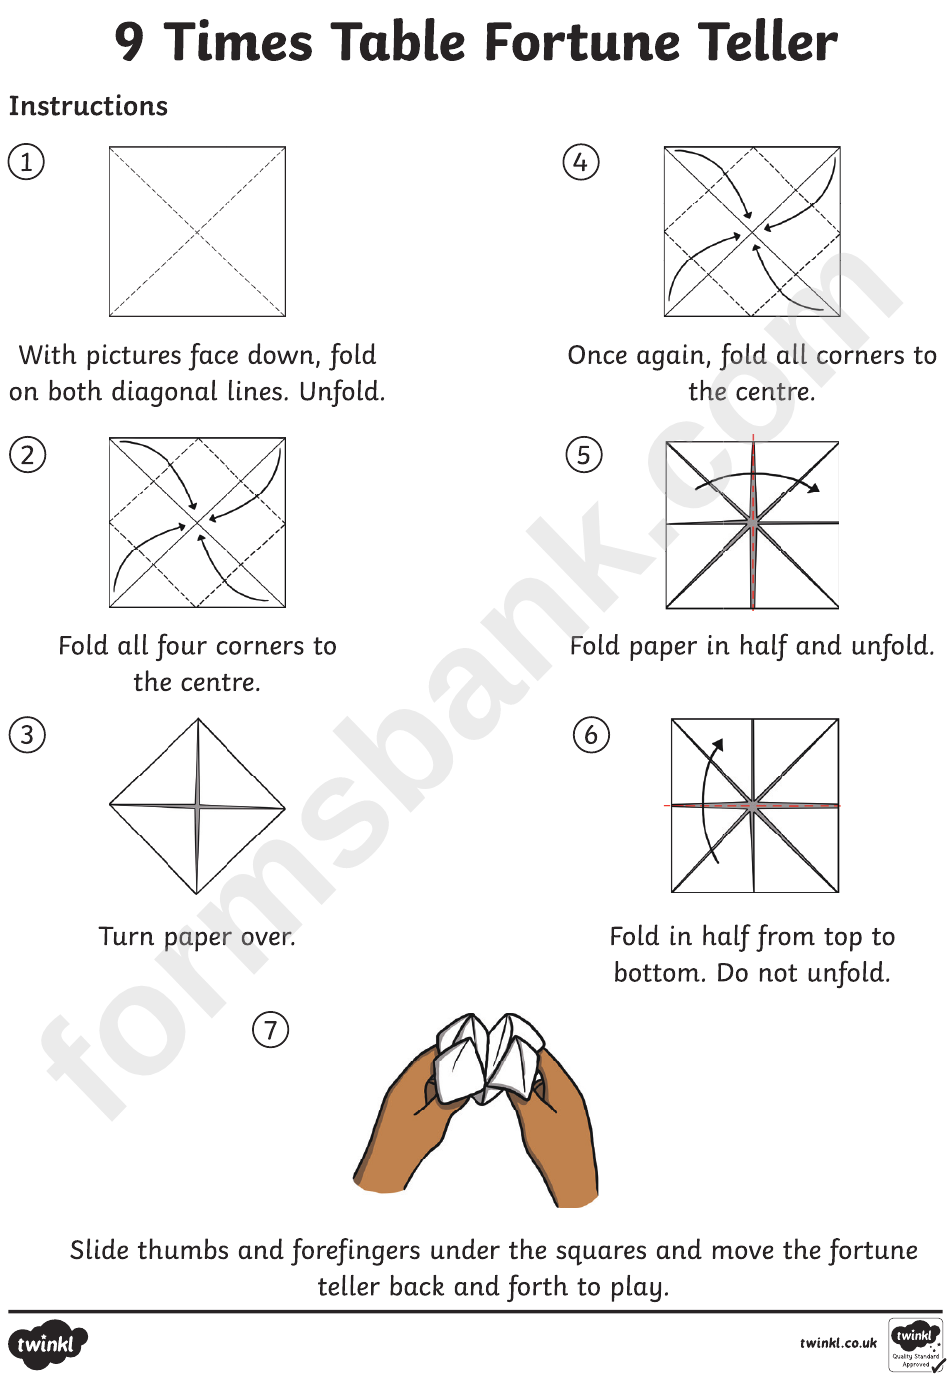 9 Times Table Fortune Teller Template